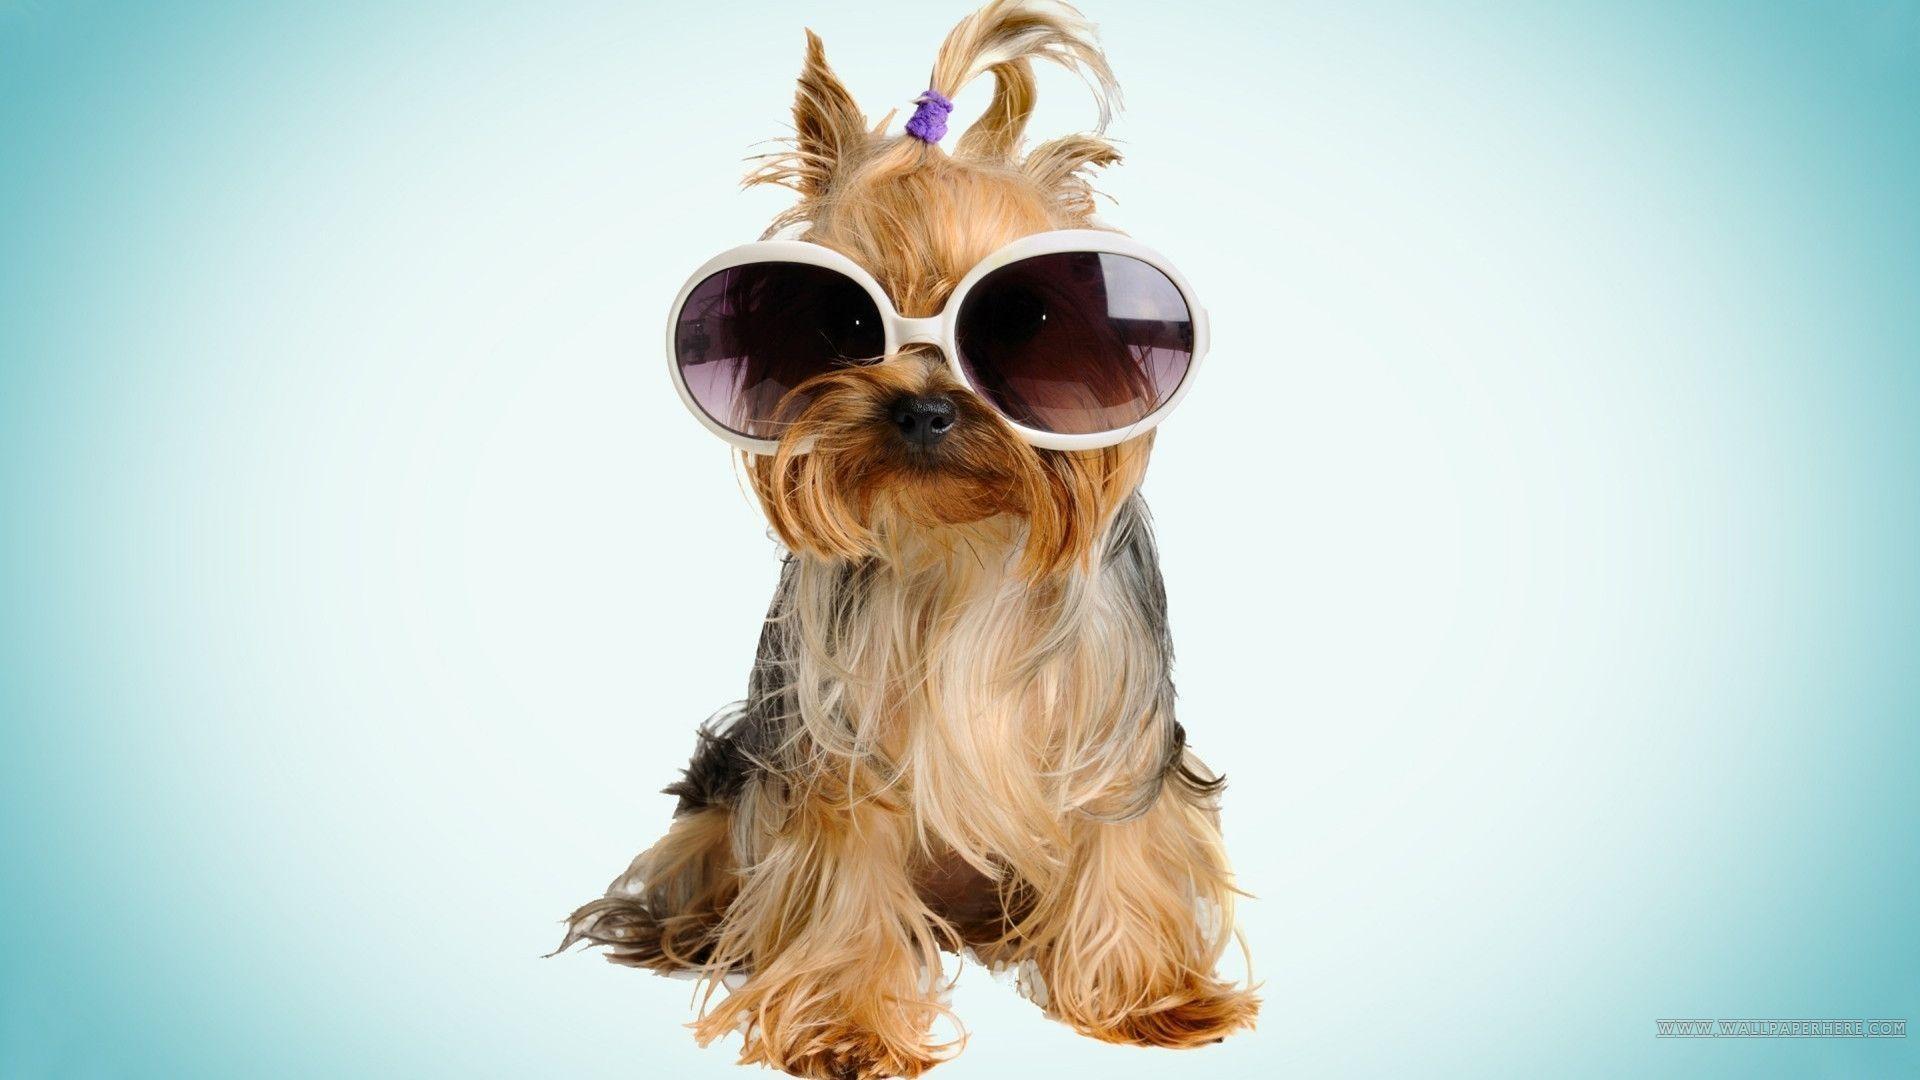 Image For > Cool Dog Wallpapers